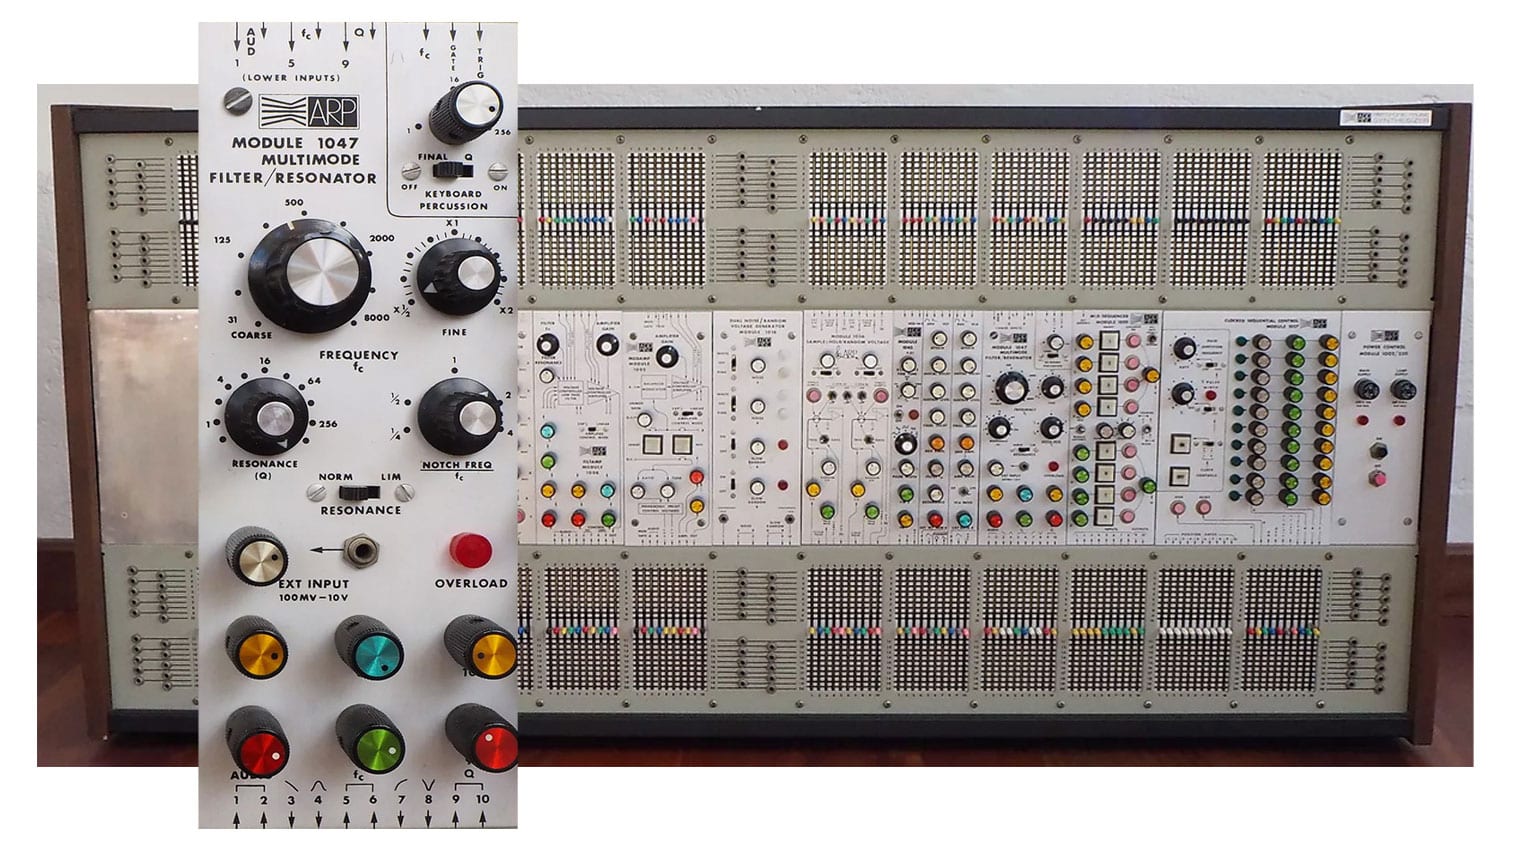 ARP 2500 and the 1047 Multimode filter